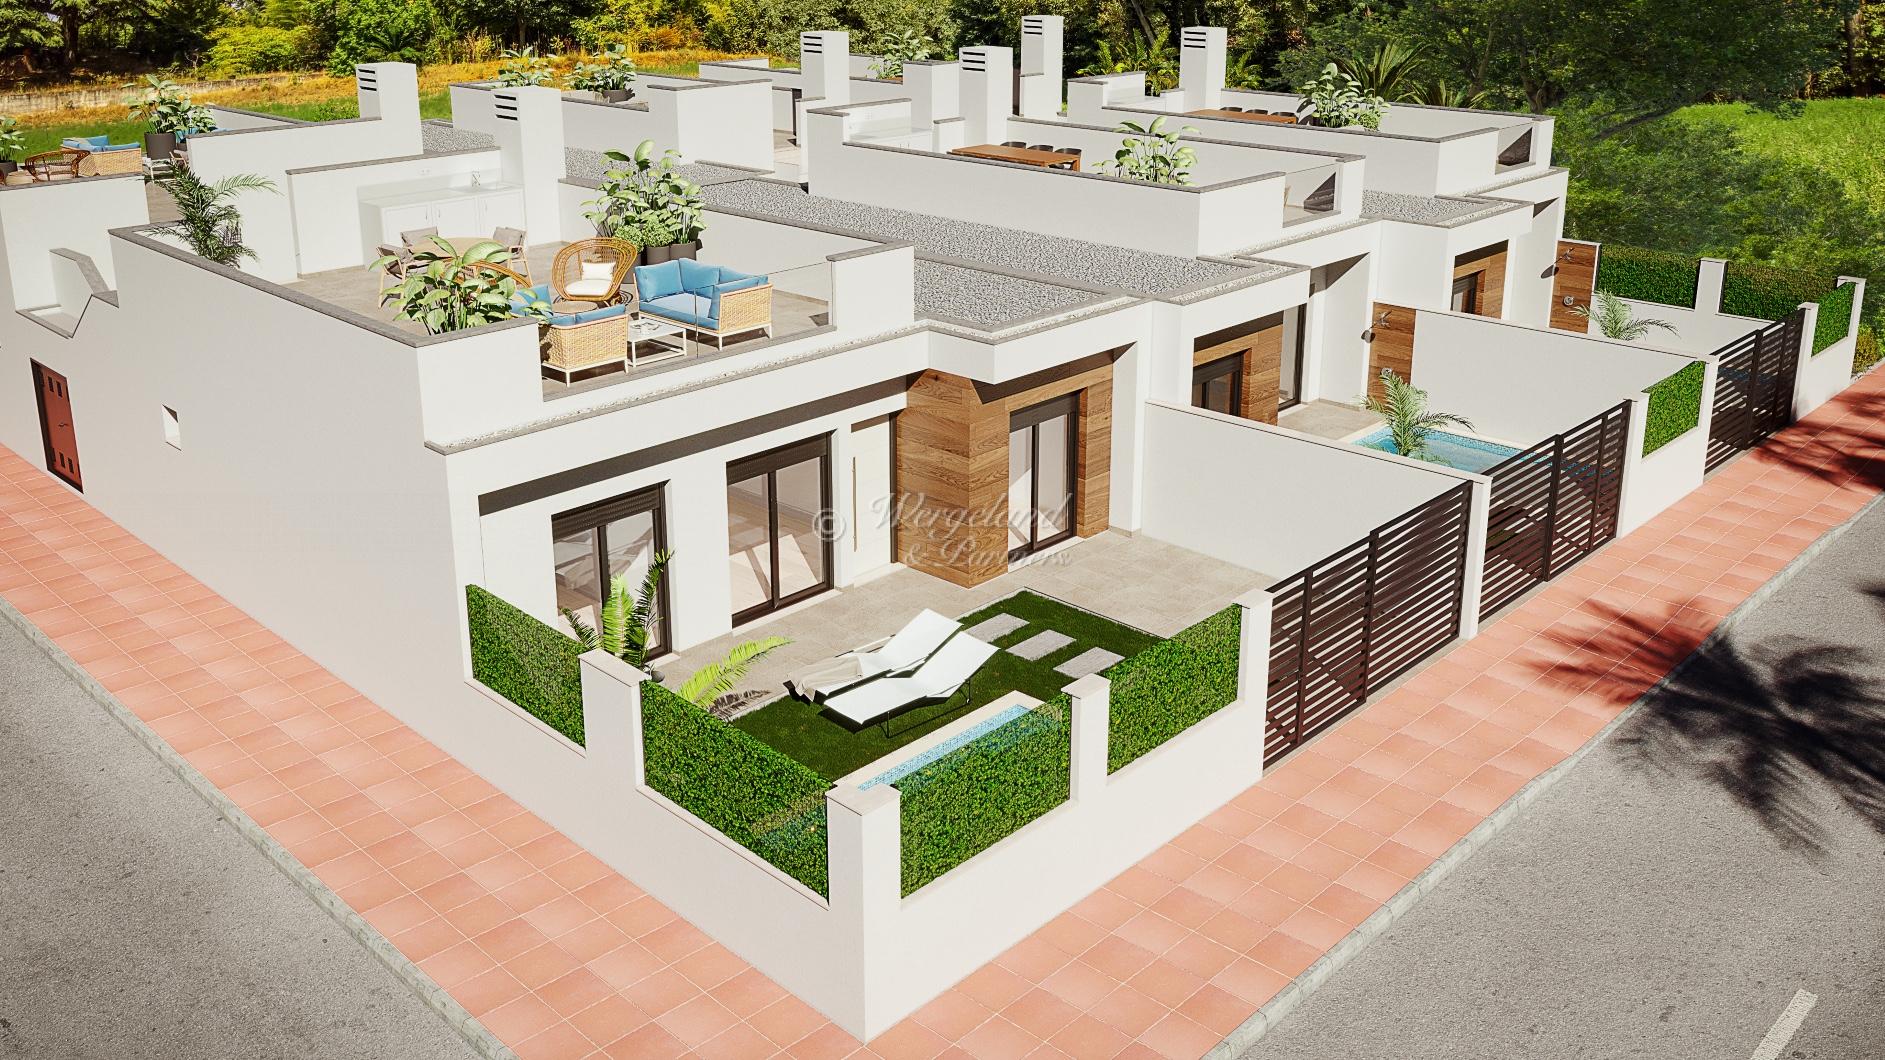 3 bedrooms Villa on one level, private pool and roof terrace [VLP3]